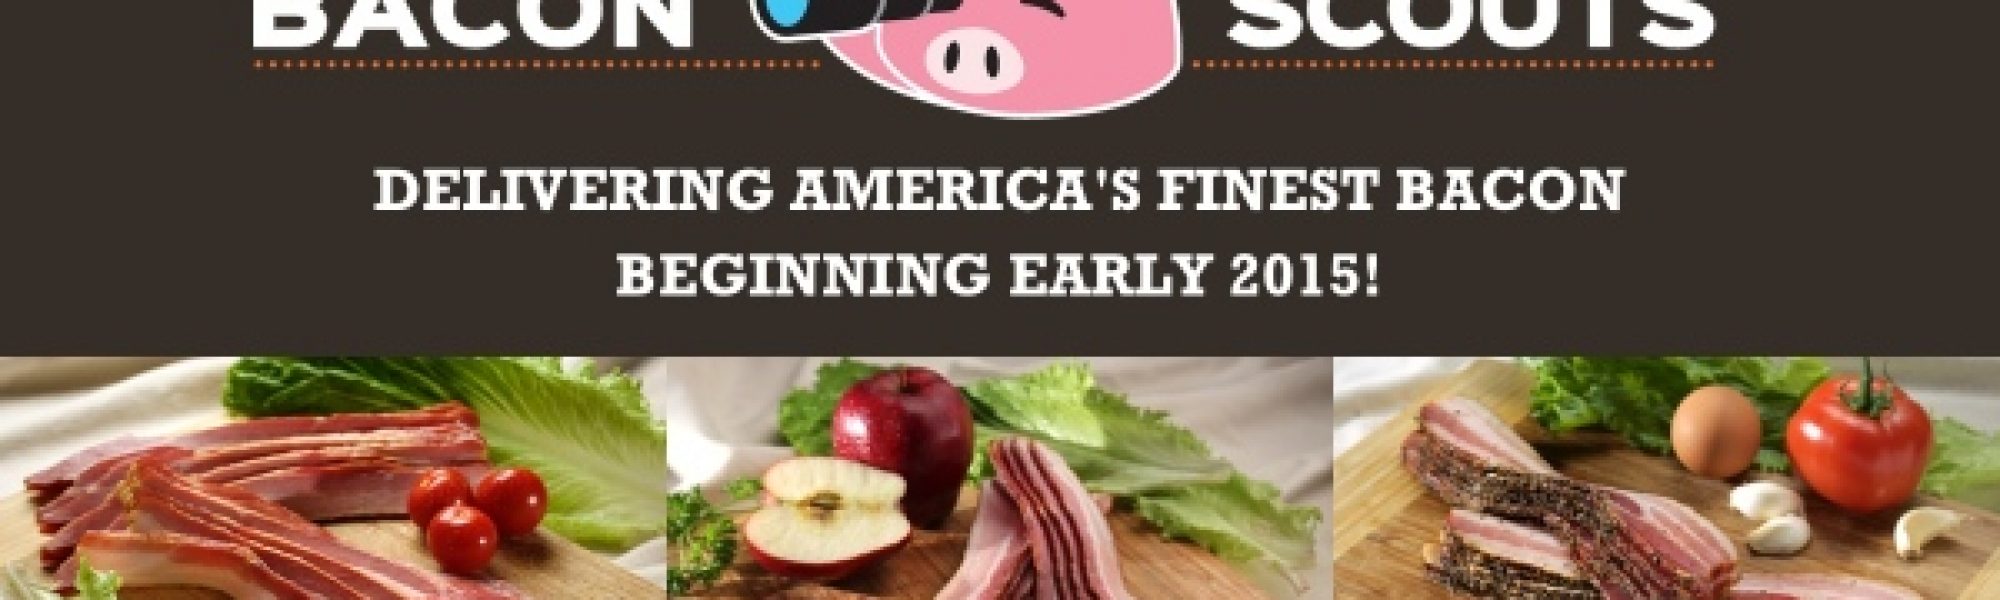 Bacon Scouts: Delivering America's Finest Bacon Beginning Early 2015!